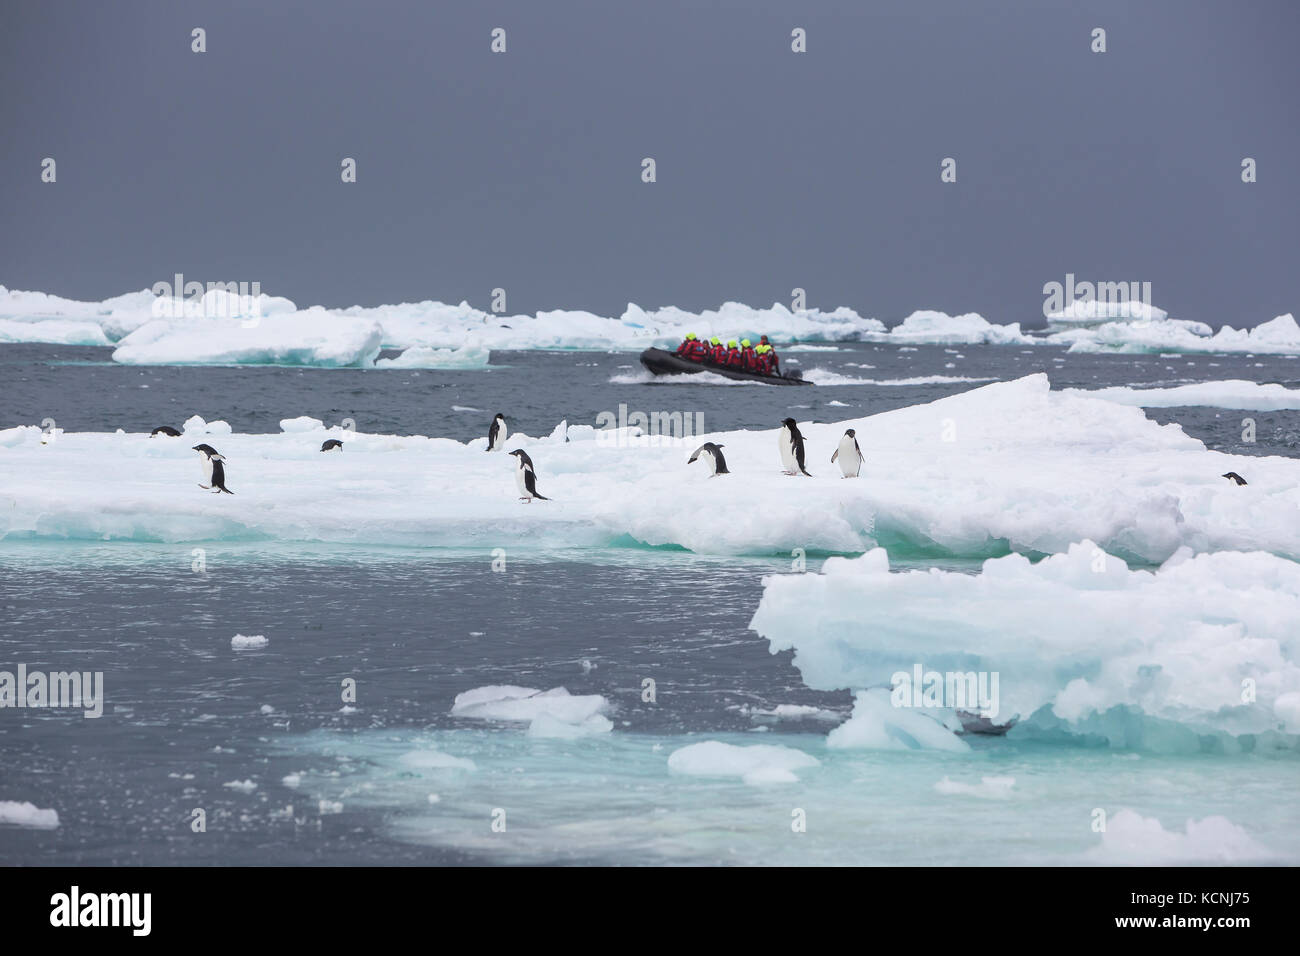 A Zodiak filled with adventure tourists powers through bergy bits and Adelie Penguins off of Brown Bluff, Antarctic Peninsula Stock Photo